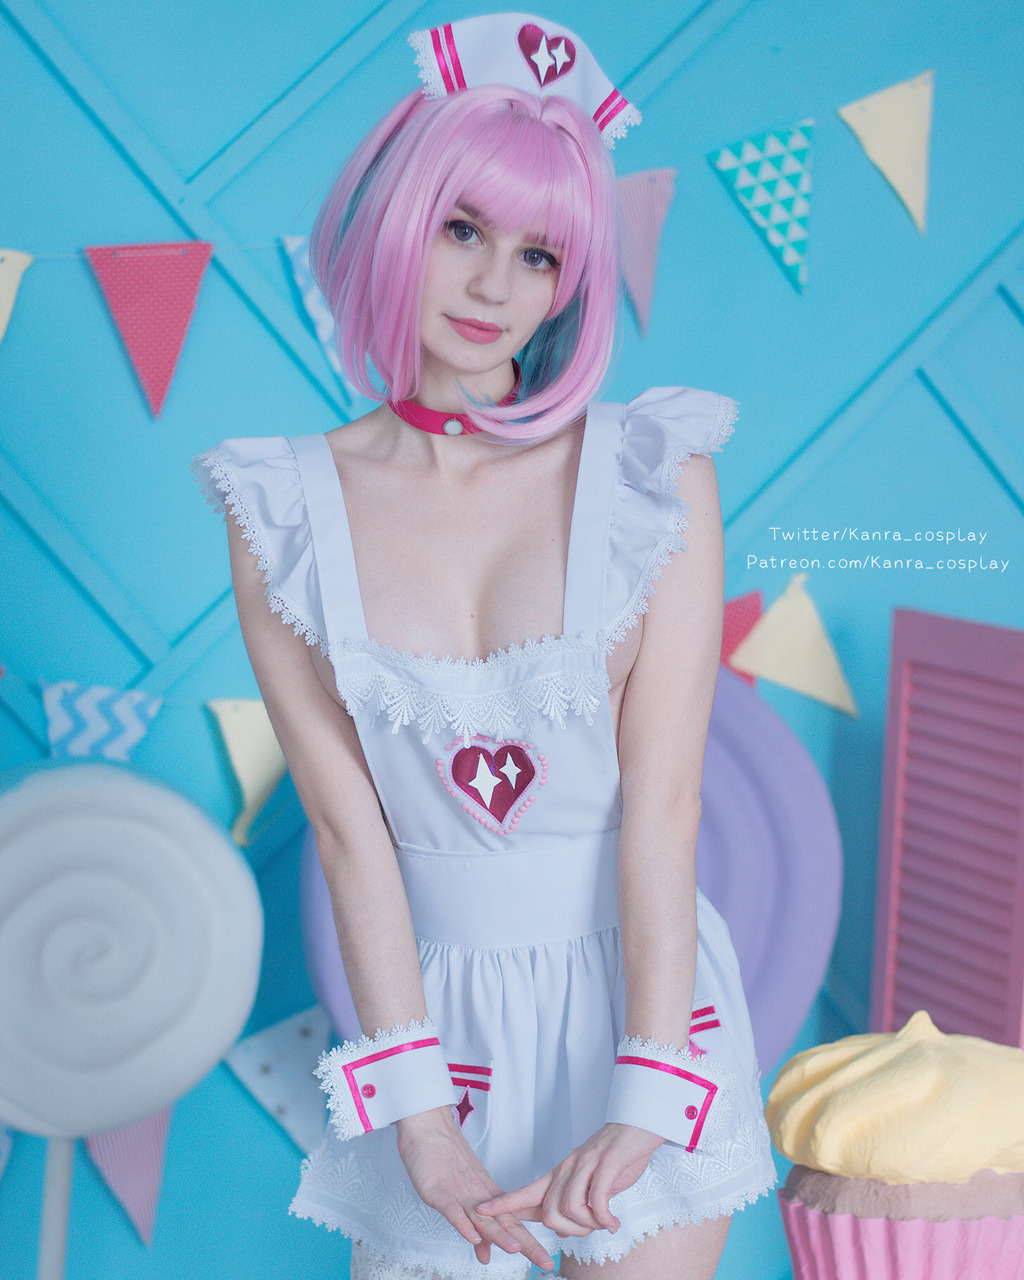 Is It Okay If I Will Stay In An Apron Or You Prefer Me To Take It Off Too Yumemi By Kanra Cospla